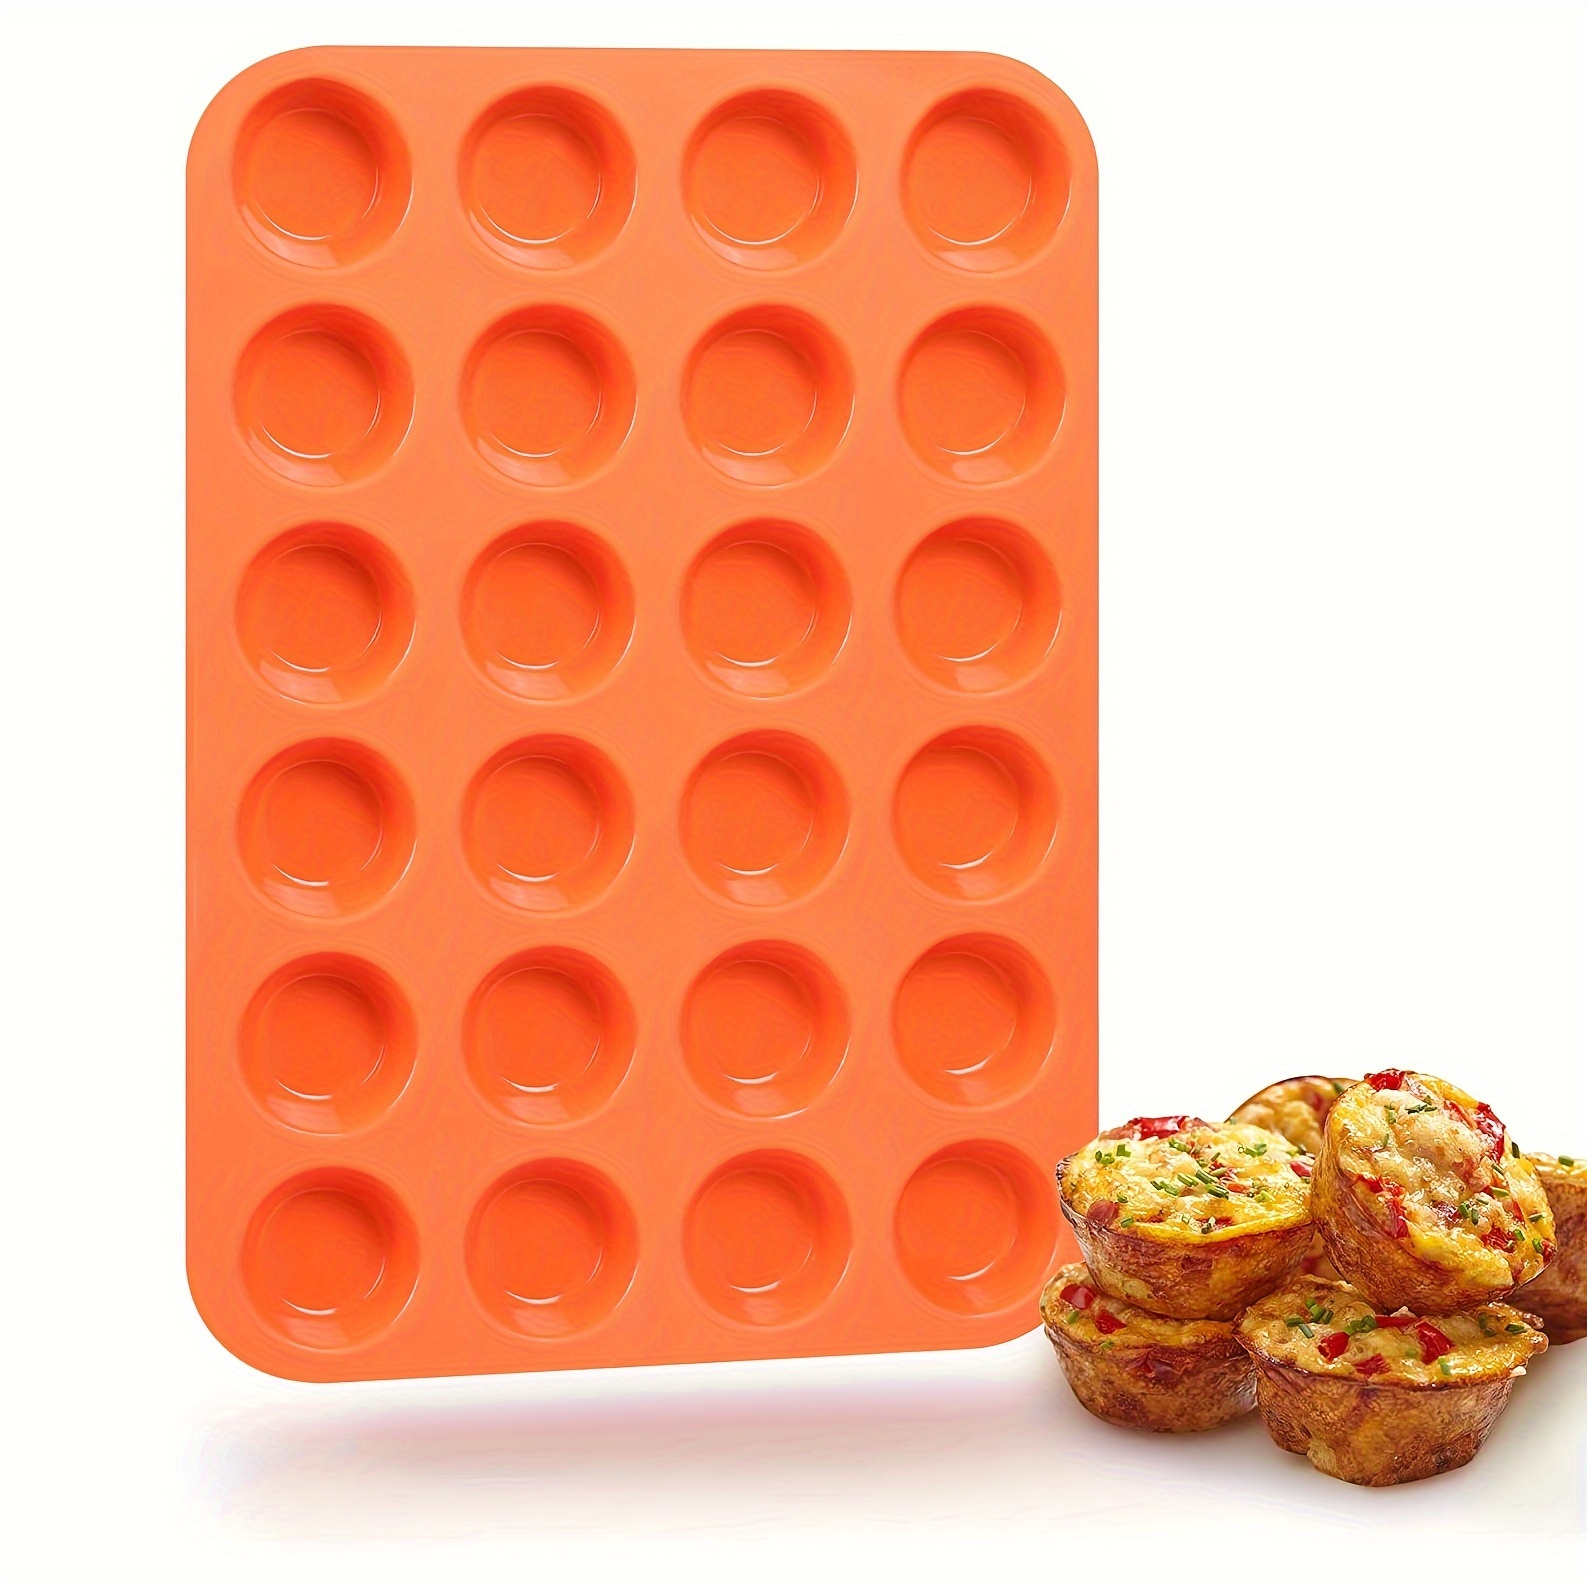 Silicone Mini Cupcake Pan Silicone Molds, 2 Pack Silicone Mini Muffin Pan  with 24 Cups Muffin Tin (Red and Blue)